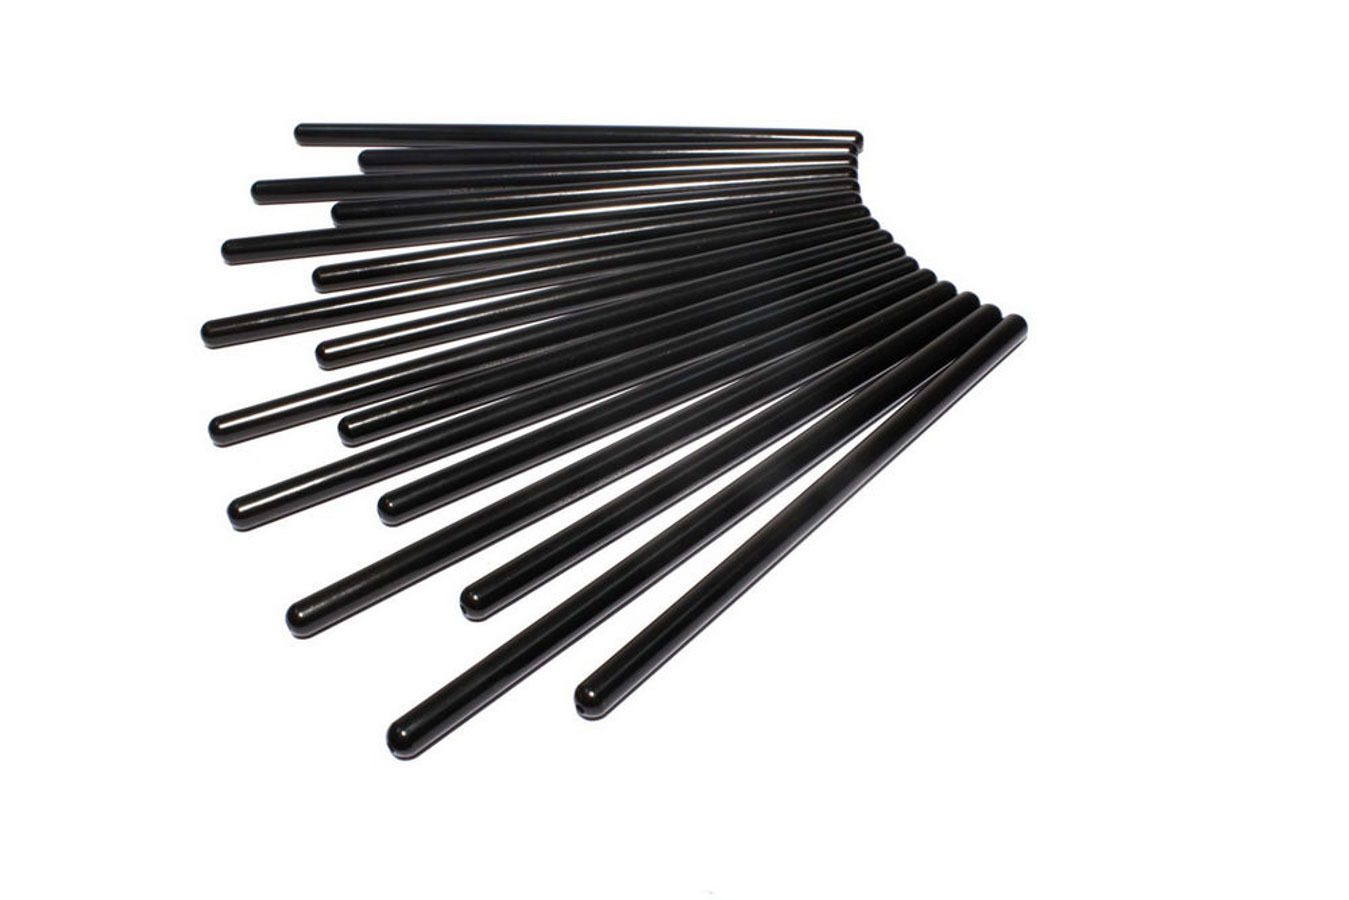 Comp Cams 7914-16 Pushrod, Hi-Tech, 7.850 / 6.600 in Long, 5/16 in Diameter, 0.080 in Thick Wall, Chromoly, Set of 16